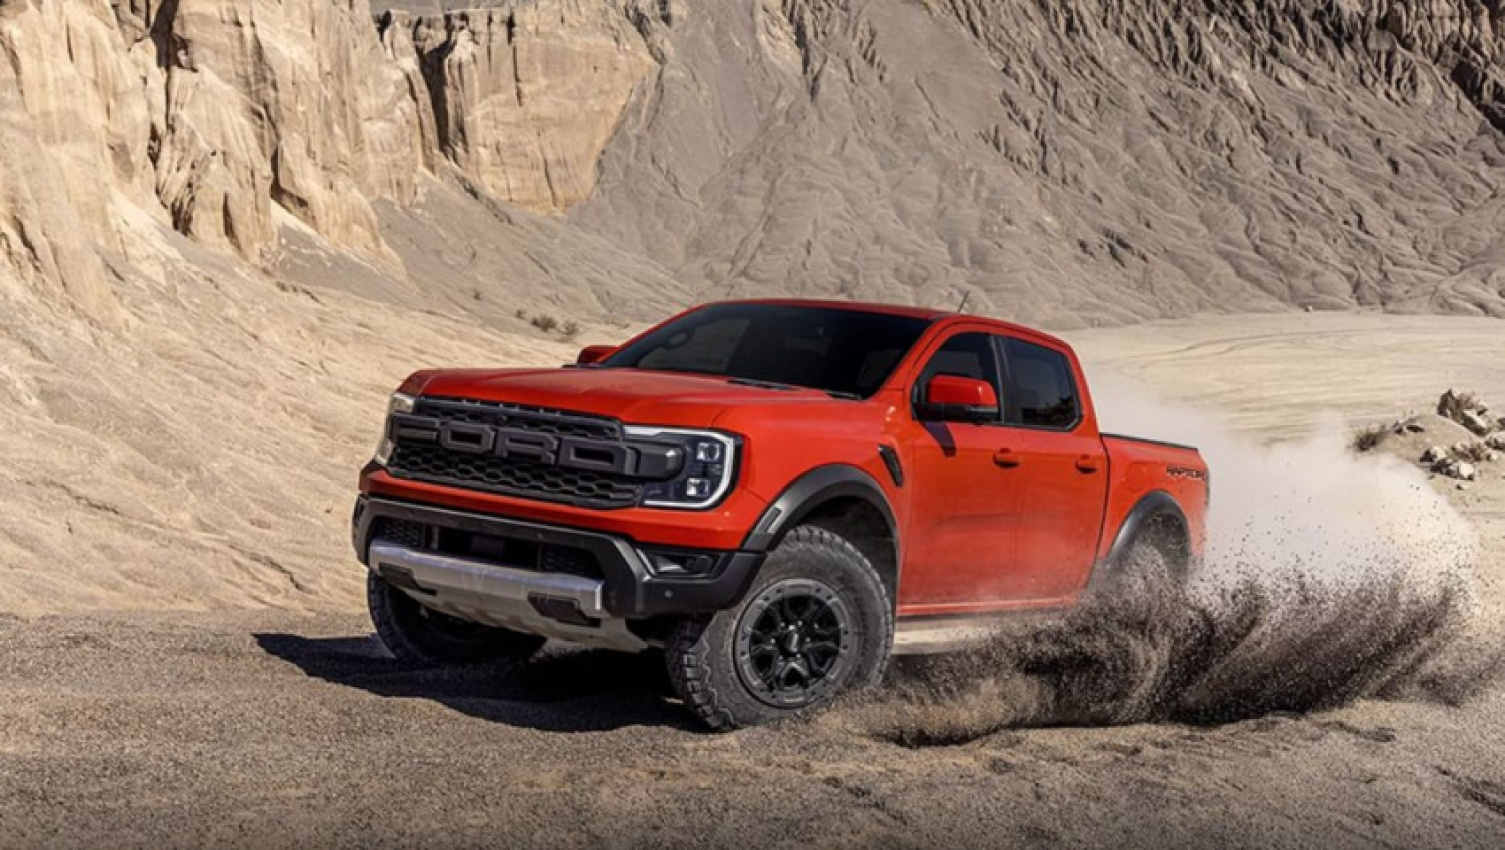 autos, cars, ford, nissan, toyota, commercial, electric, electric cars, ford commercial range, ford news, ford ranger, ford ranger 2022, ford ranger raptor, ford ute range, hybrid cars, industry news, nissan navara, plug-in hybrid, toyota hilux, where's the 2023 ford ranger raptor v6 diesel? why the secret raptor hybrid is expected to be a torque monster and eco warrior in one, to leave toyota hilux, nissan navara reeling